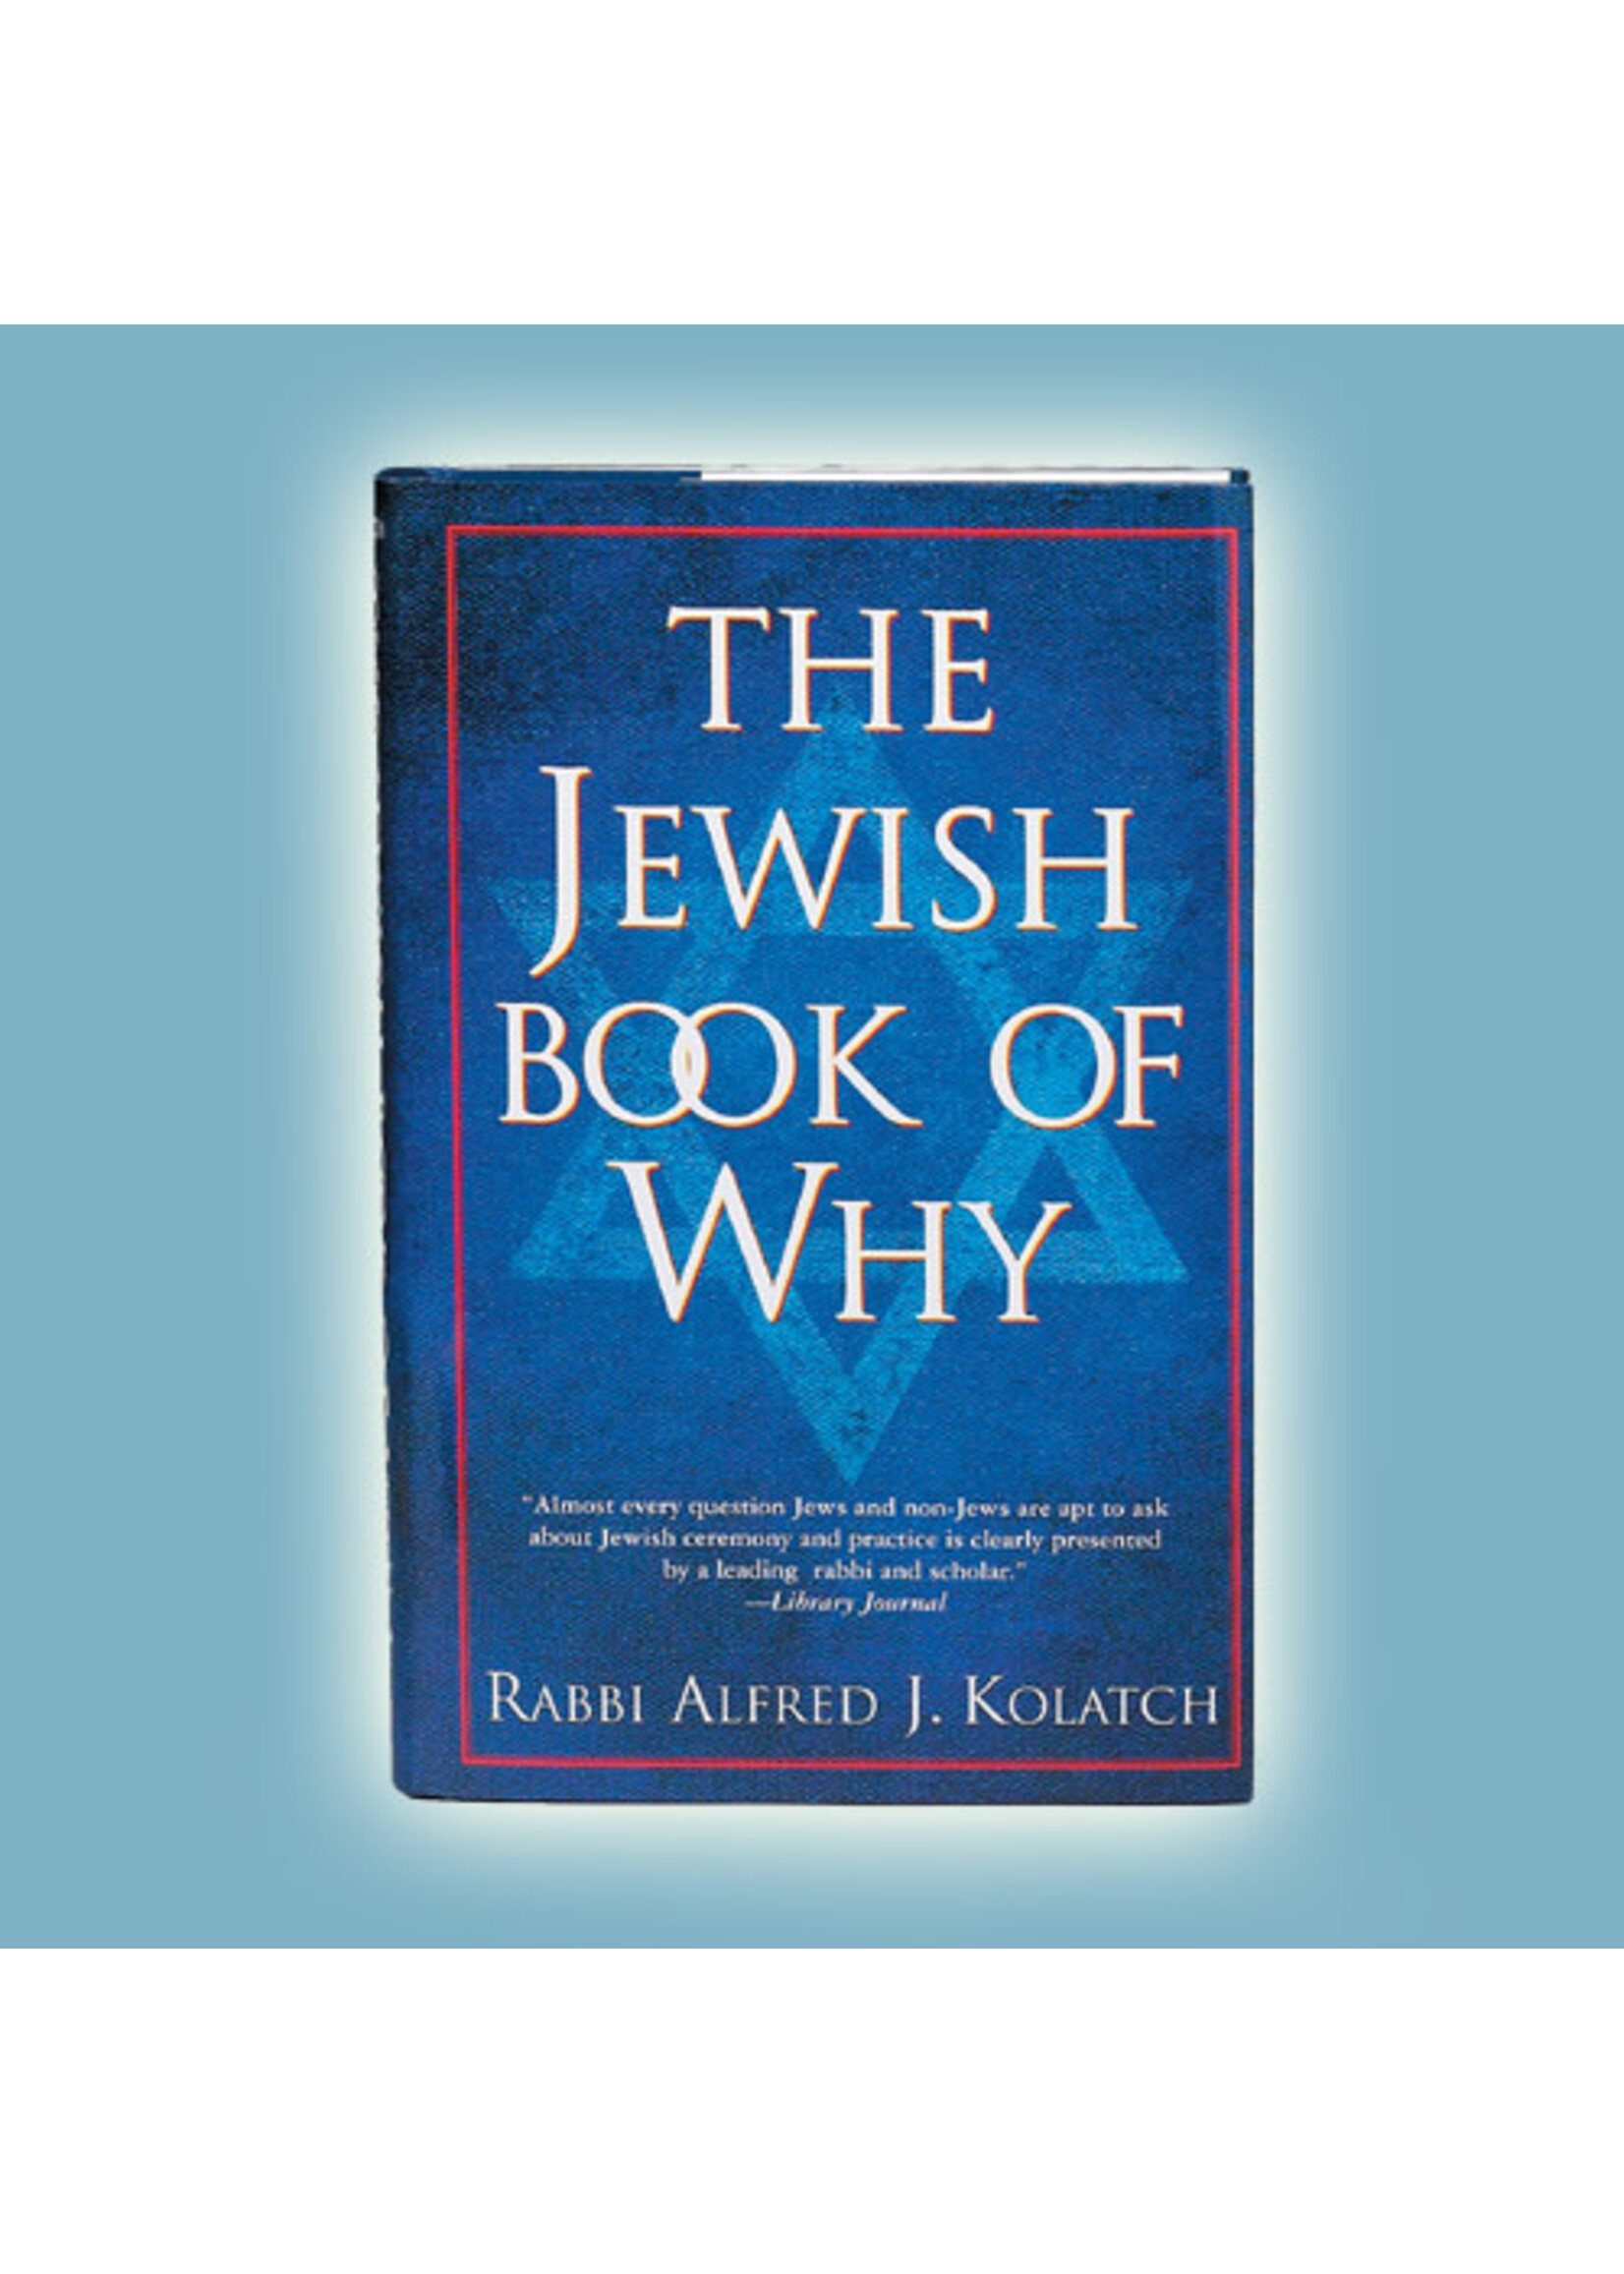 THE JEWISH BOOK OF WHY